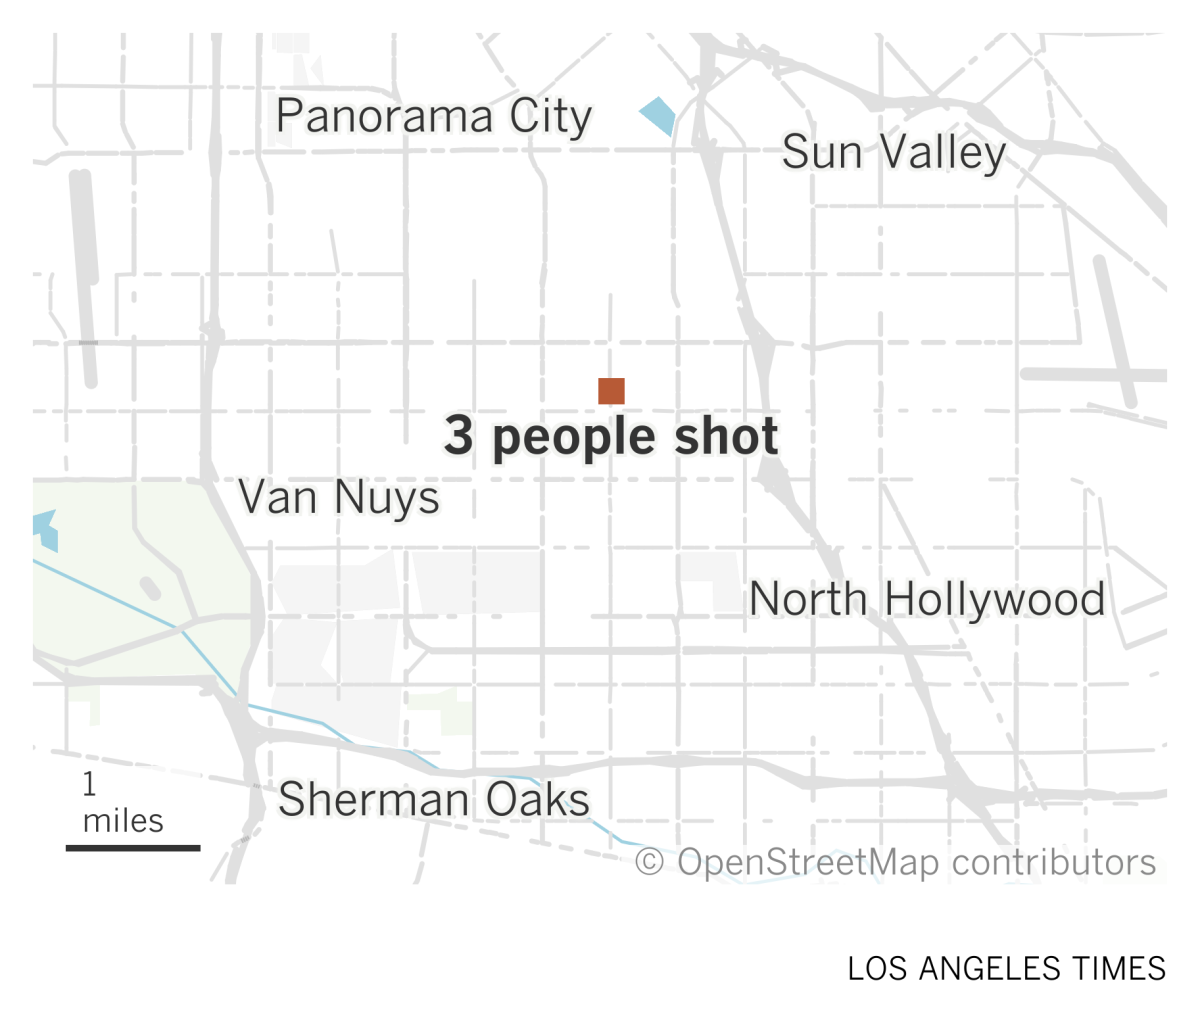 A map of the San Fernando Valley shows the location where three people were shot in Valley Glen